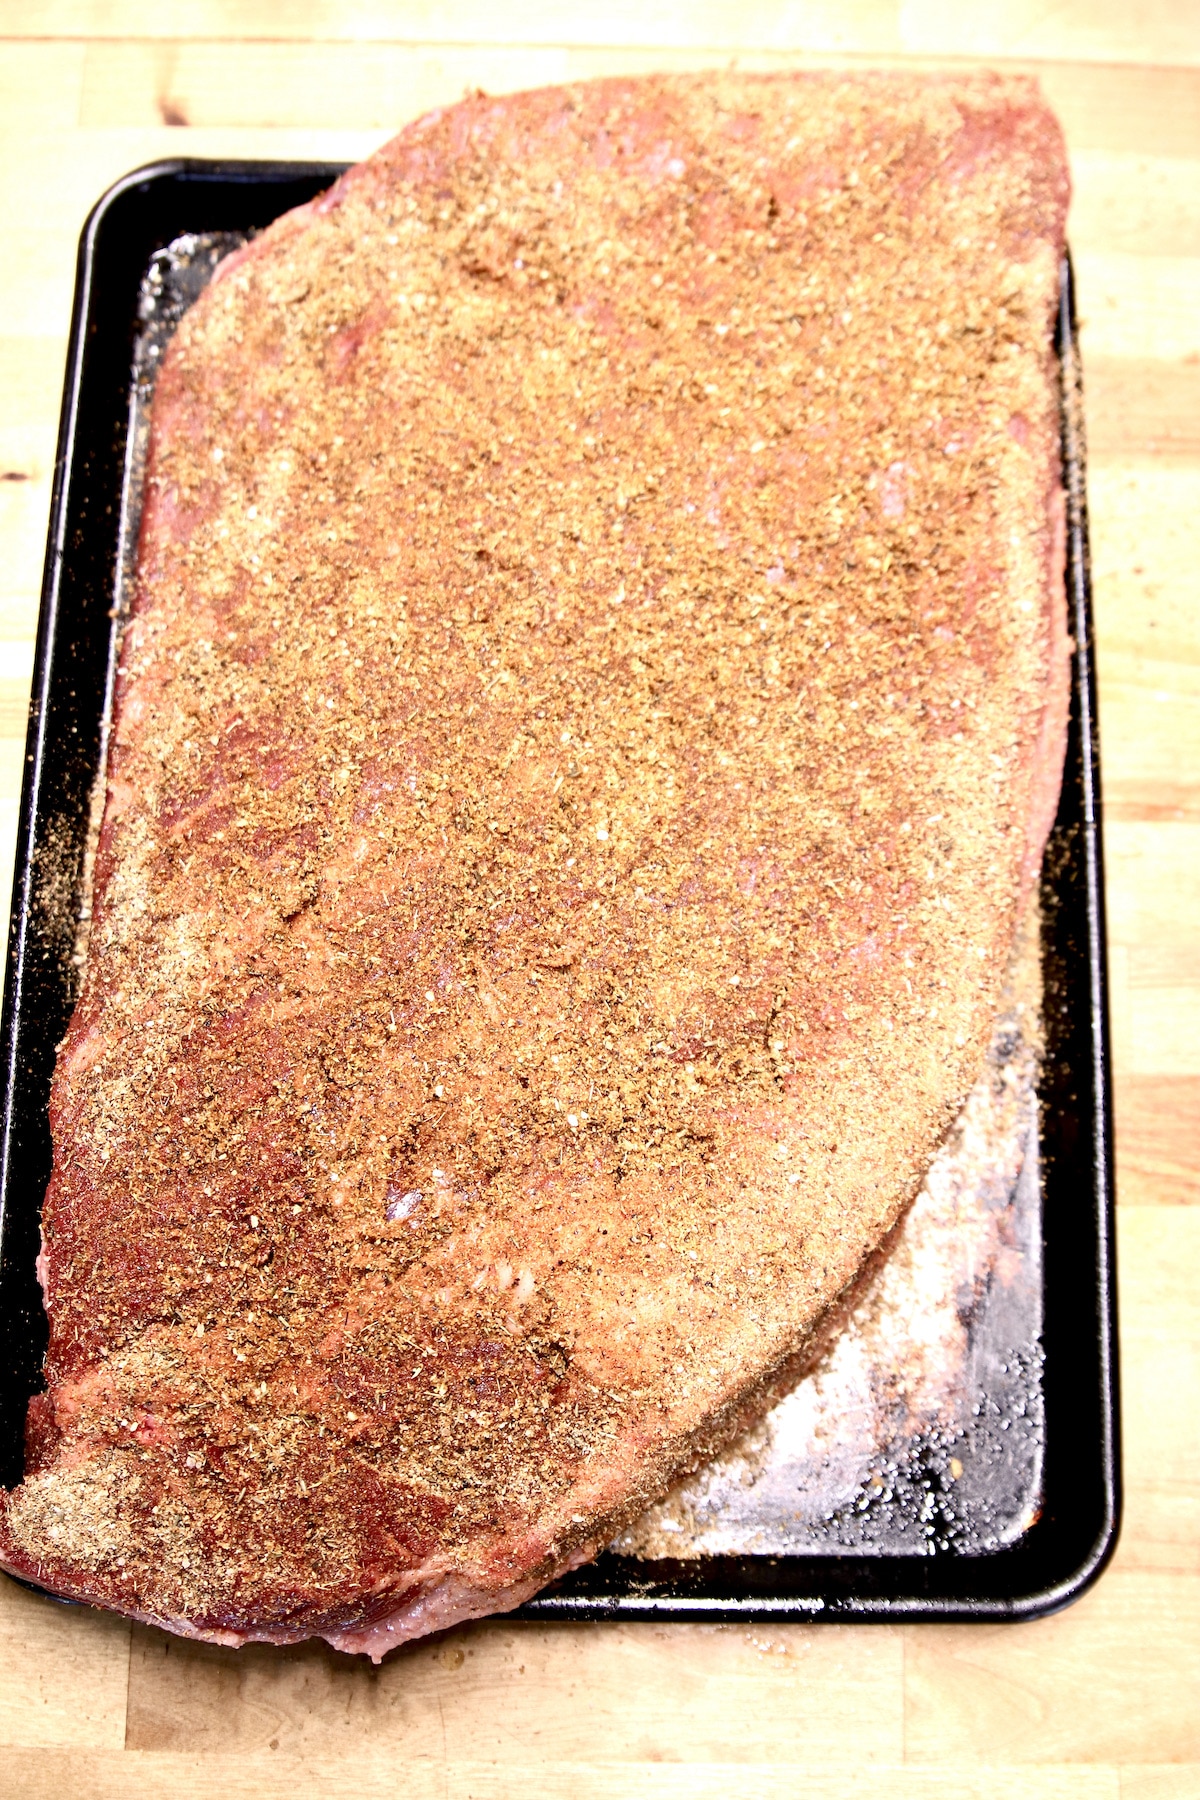 Dry rubbed beef brisket on a sheet pan ready to smoke.